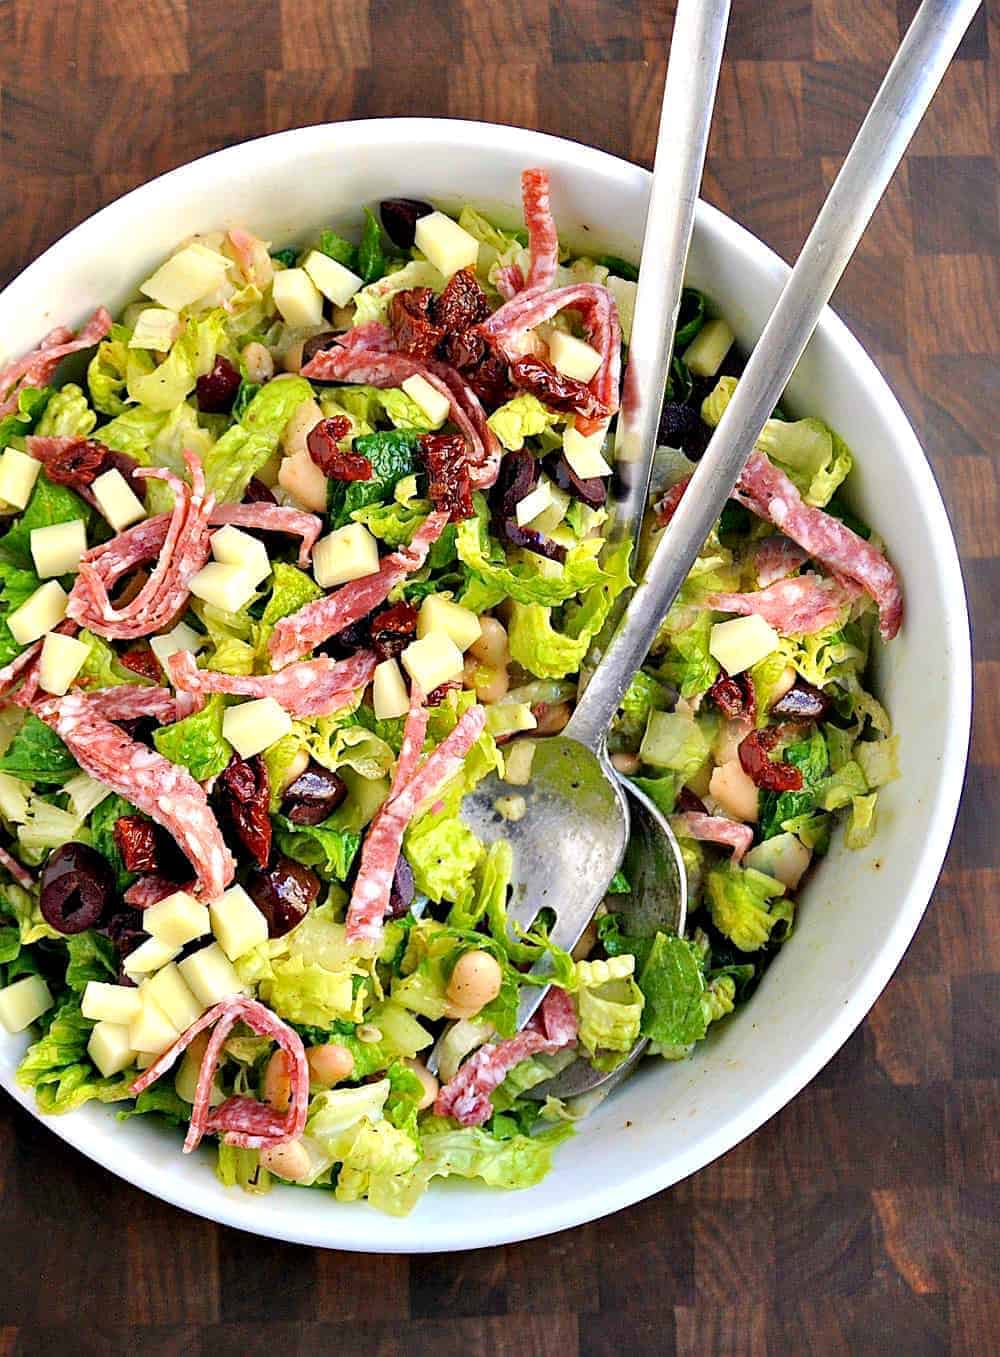 A bowl of gluten-free salad with meat and vegetables.